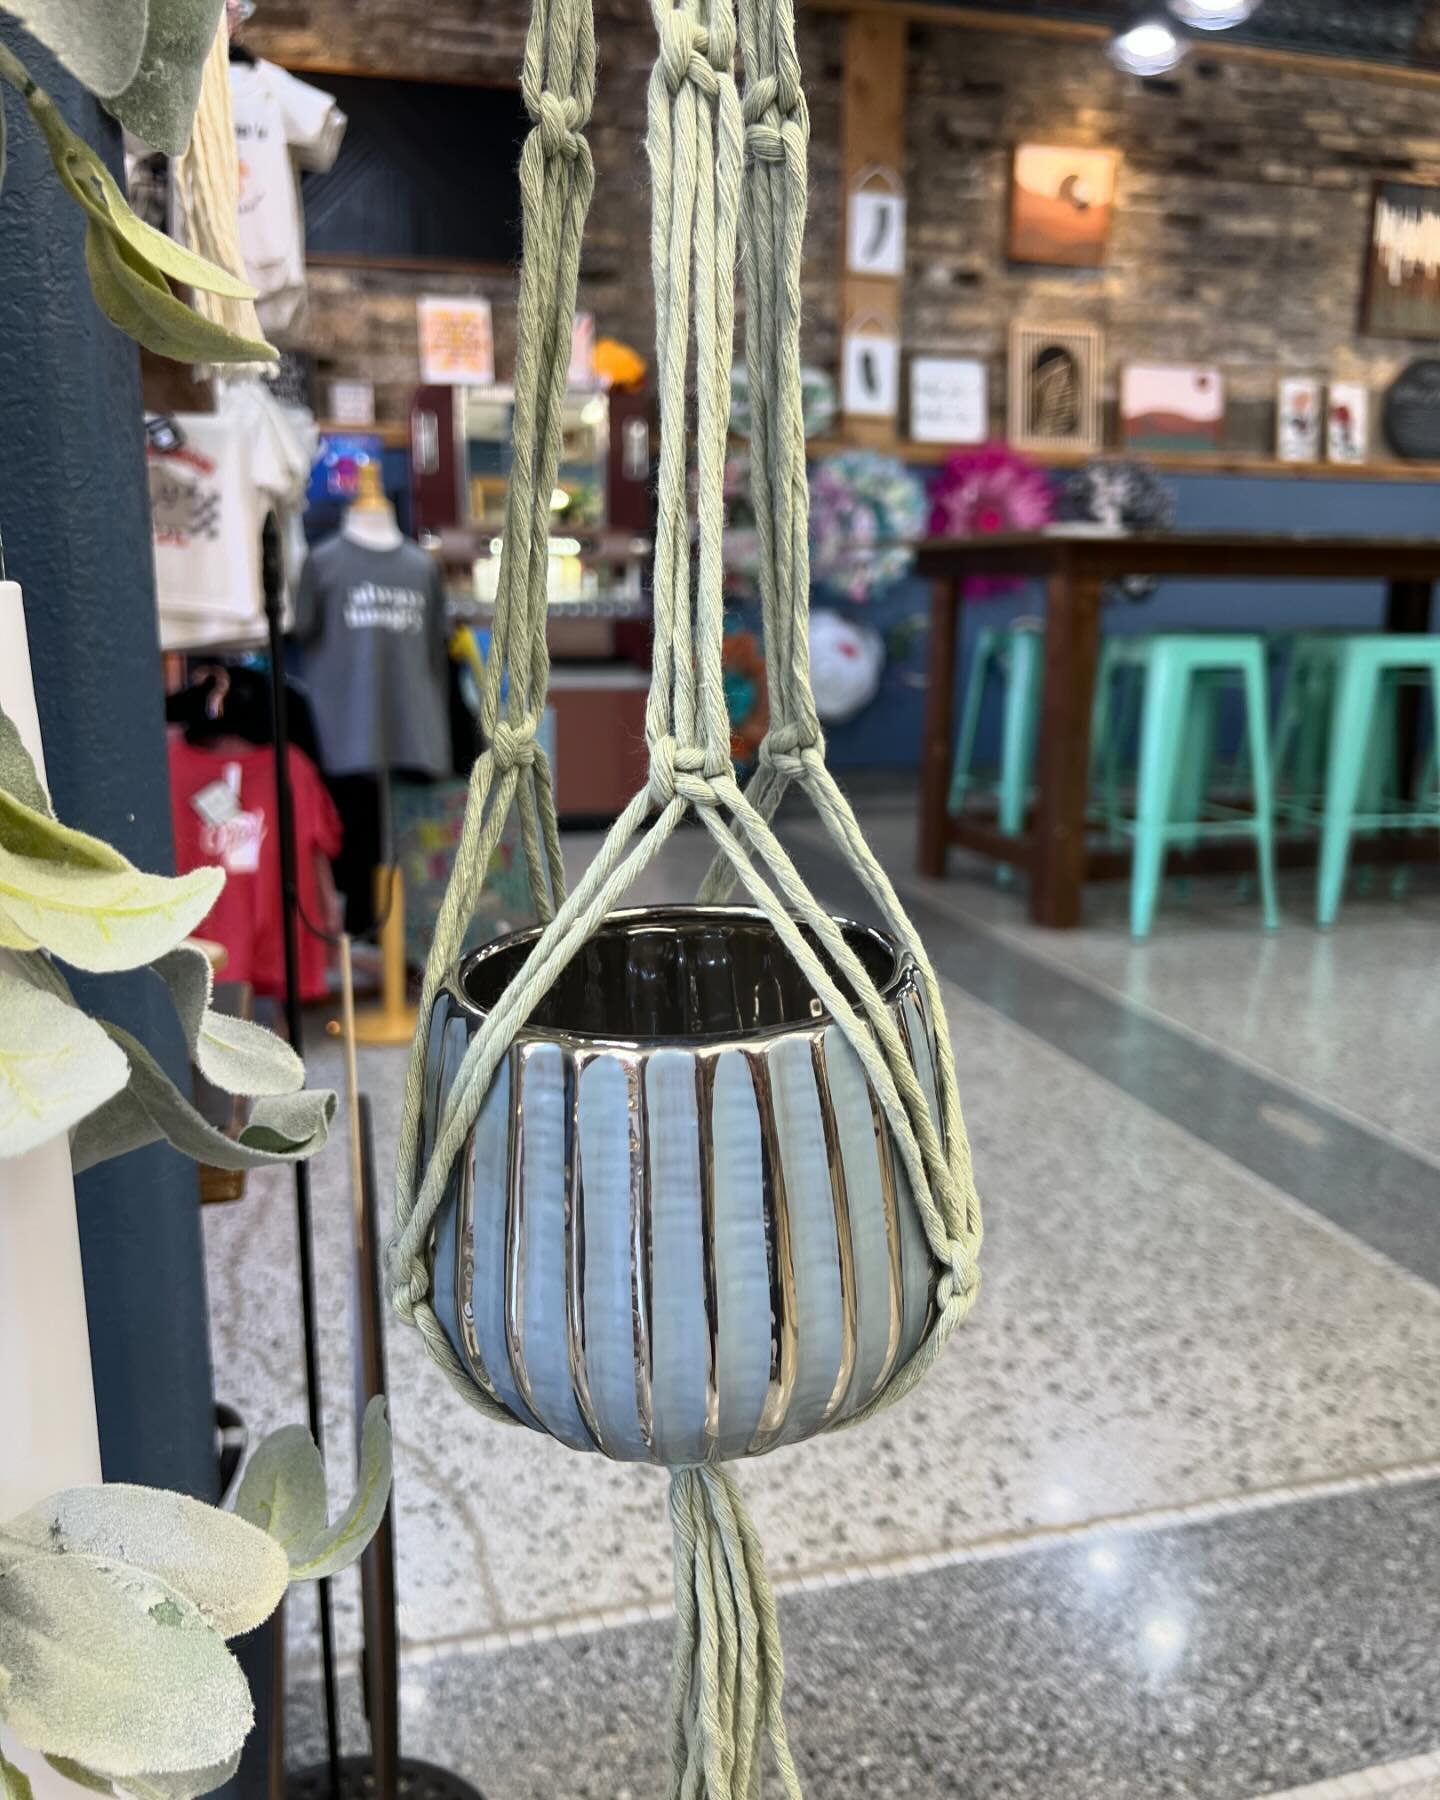 Plant hangers, camping flags, and garden stakes are in! So many great new items to see daily!